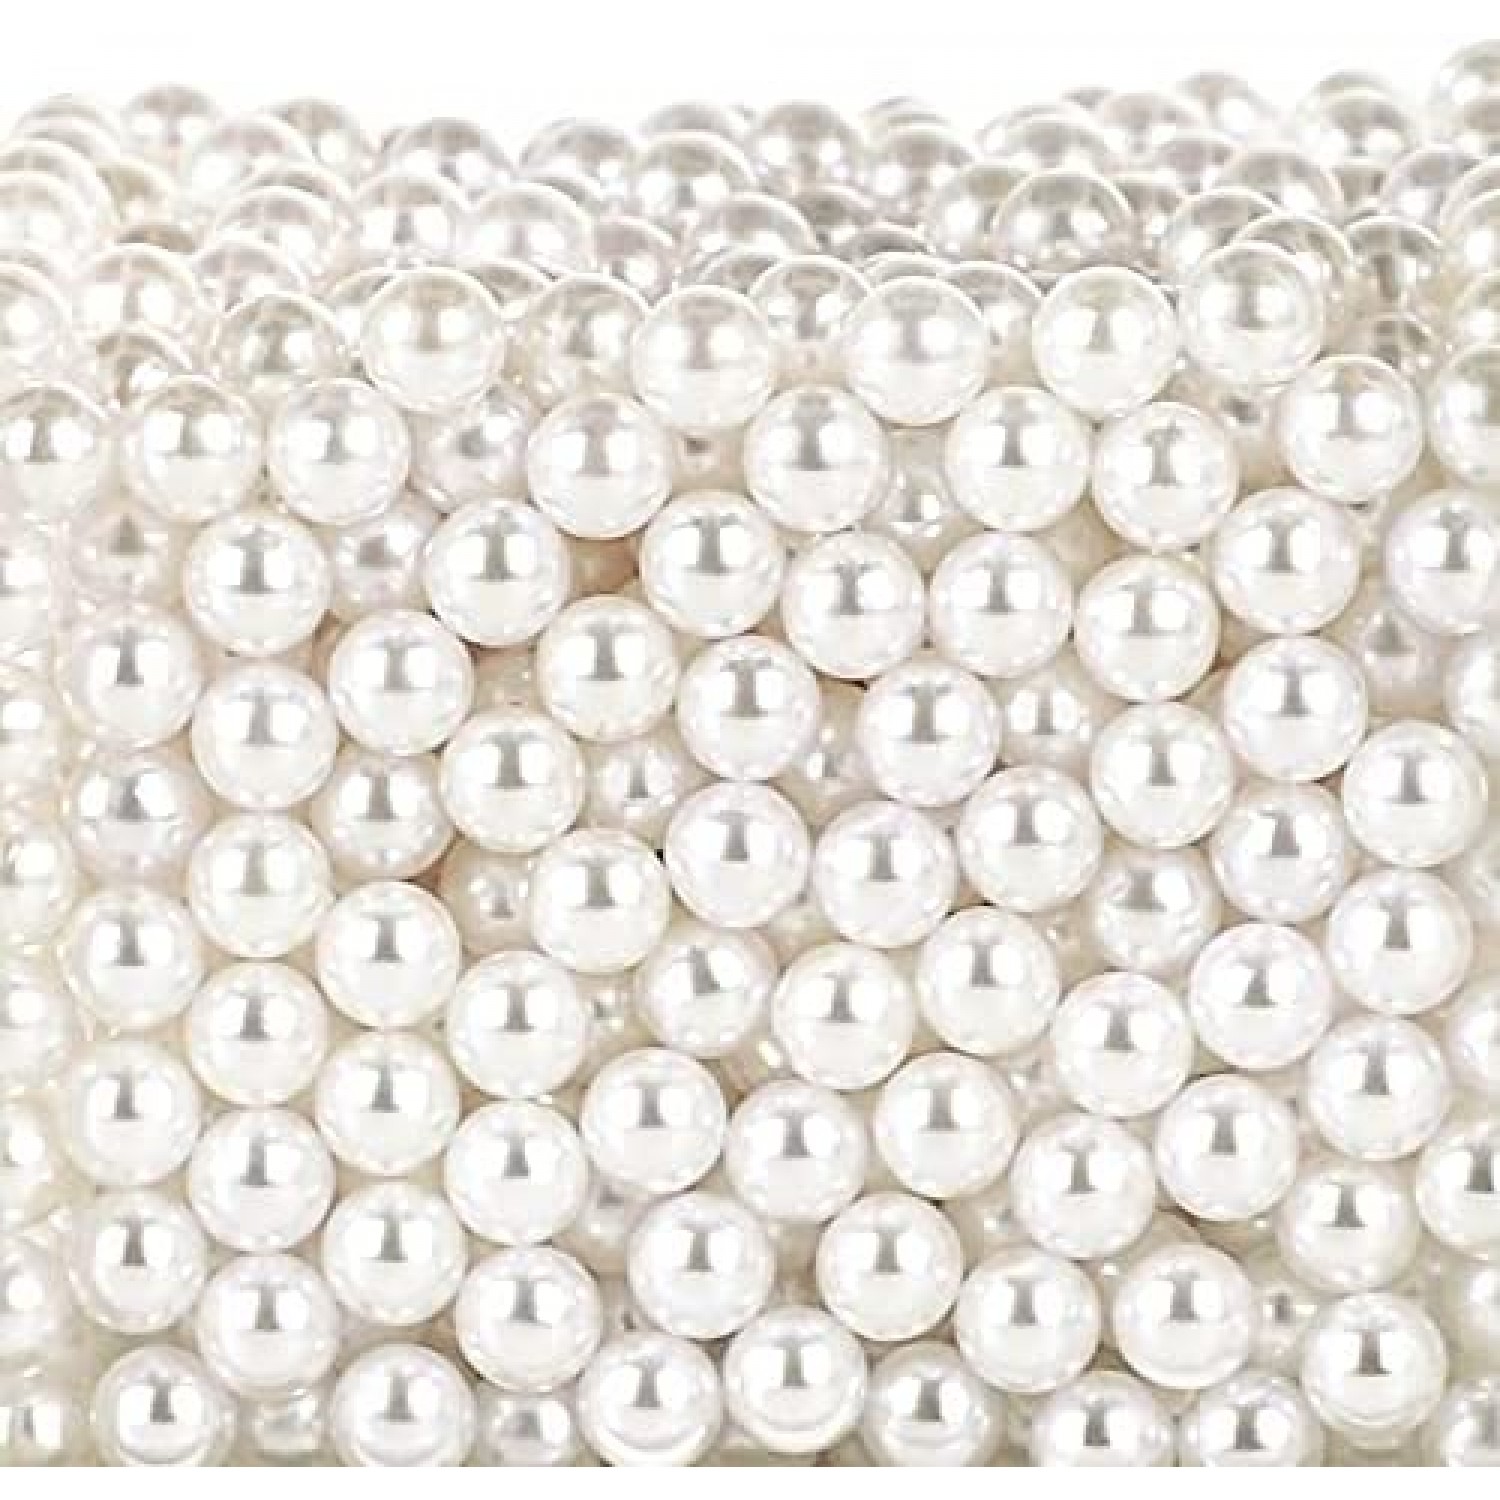 Niziky 500PCS 6mm Crafts No Hole Pearls, White/Green Loose Pearls Beads  Without Holes, Round No Hole Pearls Vase Fillers, Pearls for Crafts,  Wedding